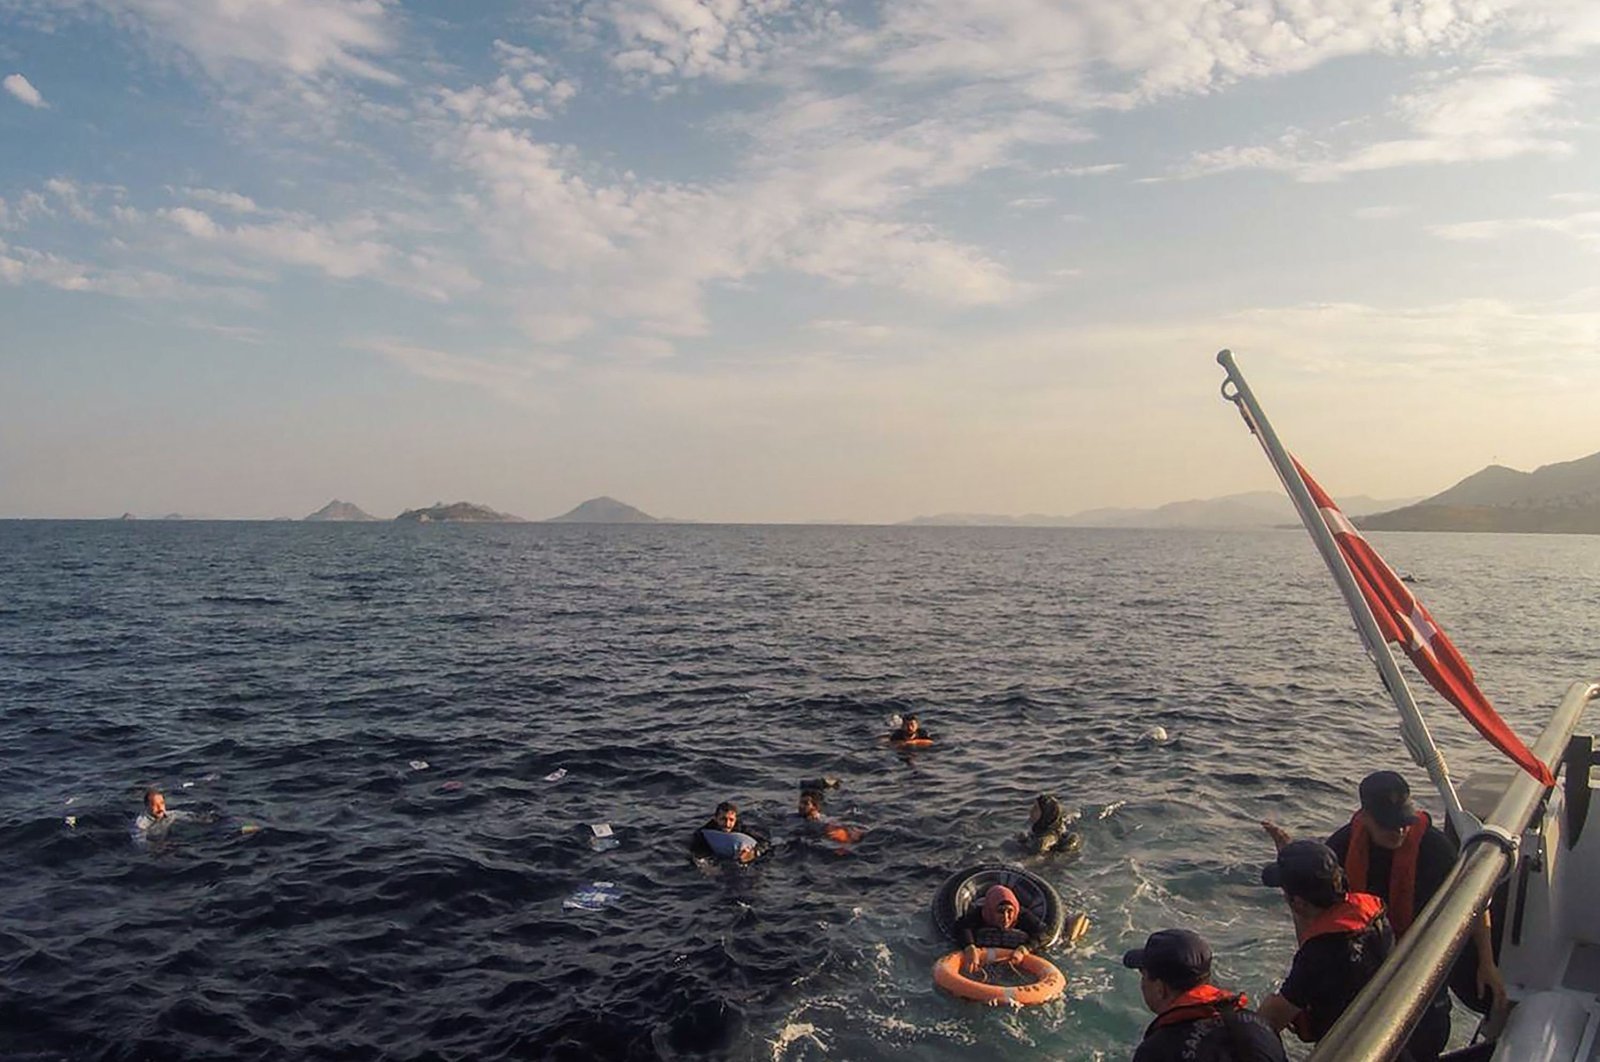 The Turkish coast guard rescues illegal migrants after their boat sank in the Aegean Sea, off the coast of southwestern Turkey, June 17, 2019. (AFP Photo)